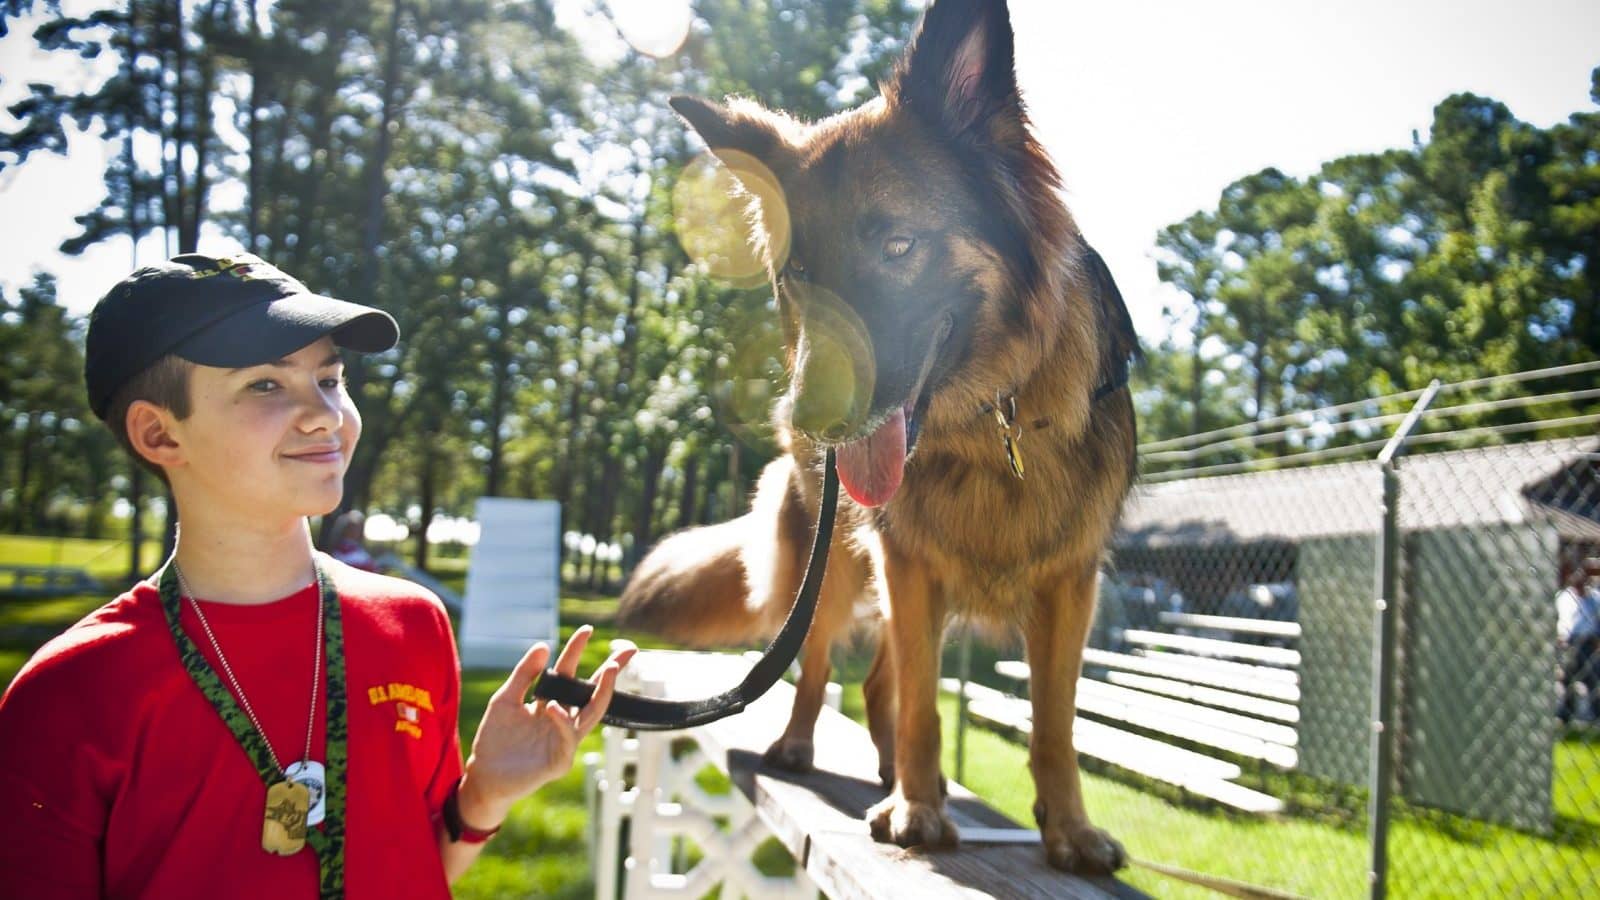 Image: a boy and his seizure response dog train together